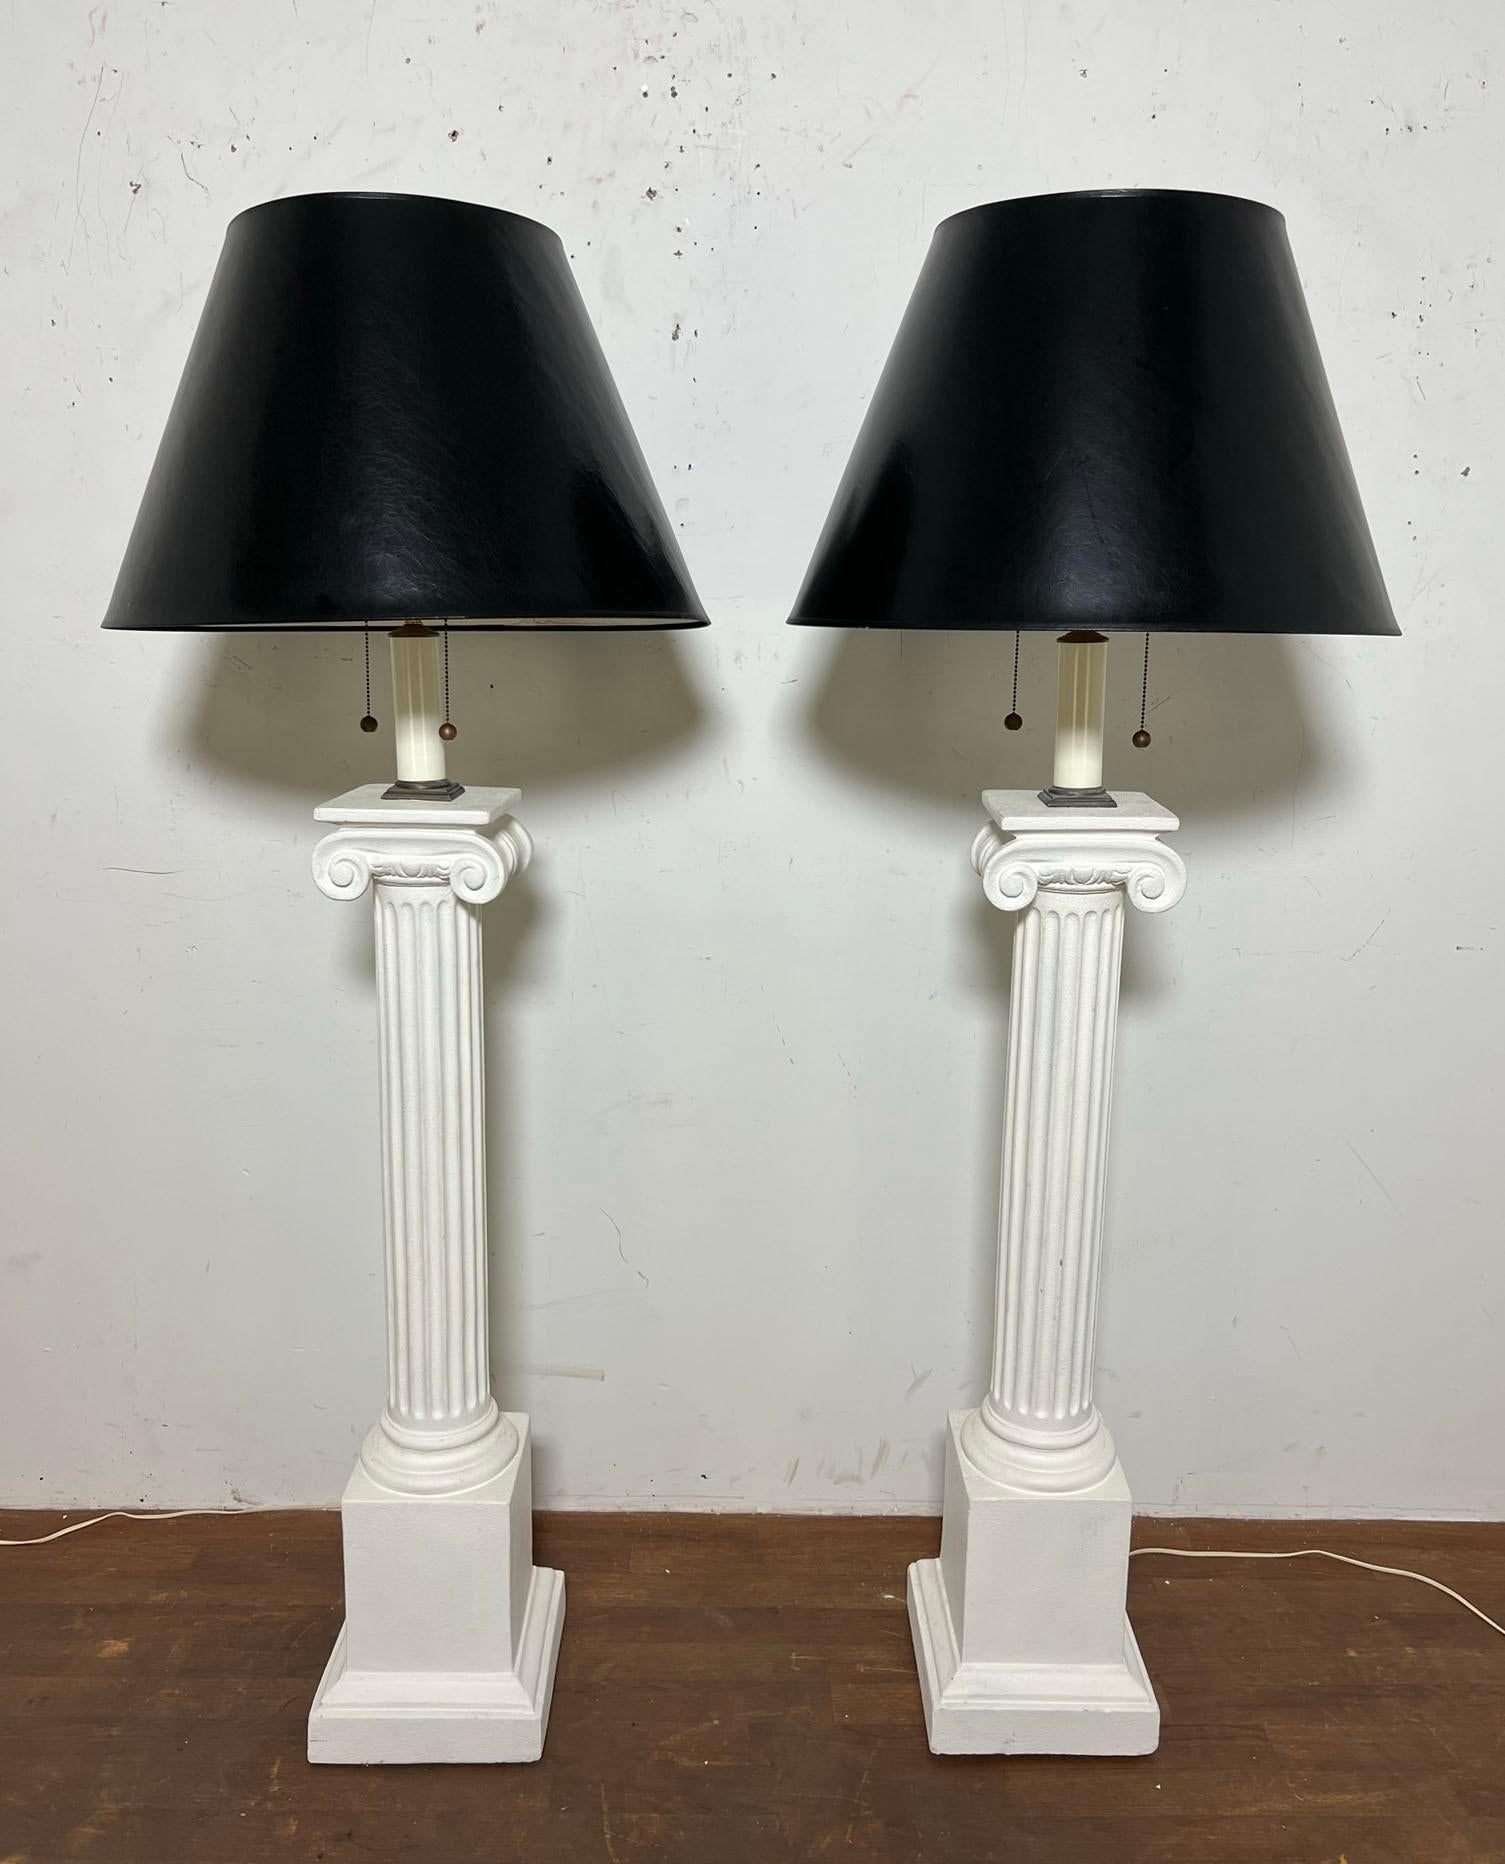 A pair of sculptural plaster floor lamps by Bob Graham ca. 1980s. These are of adjustable height, with the original black lacquer shades.

64.5